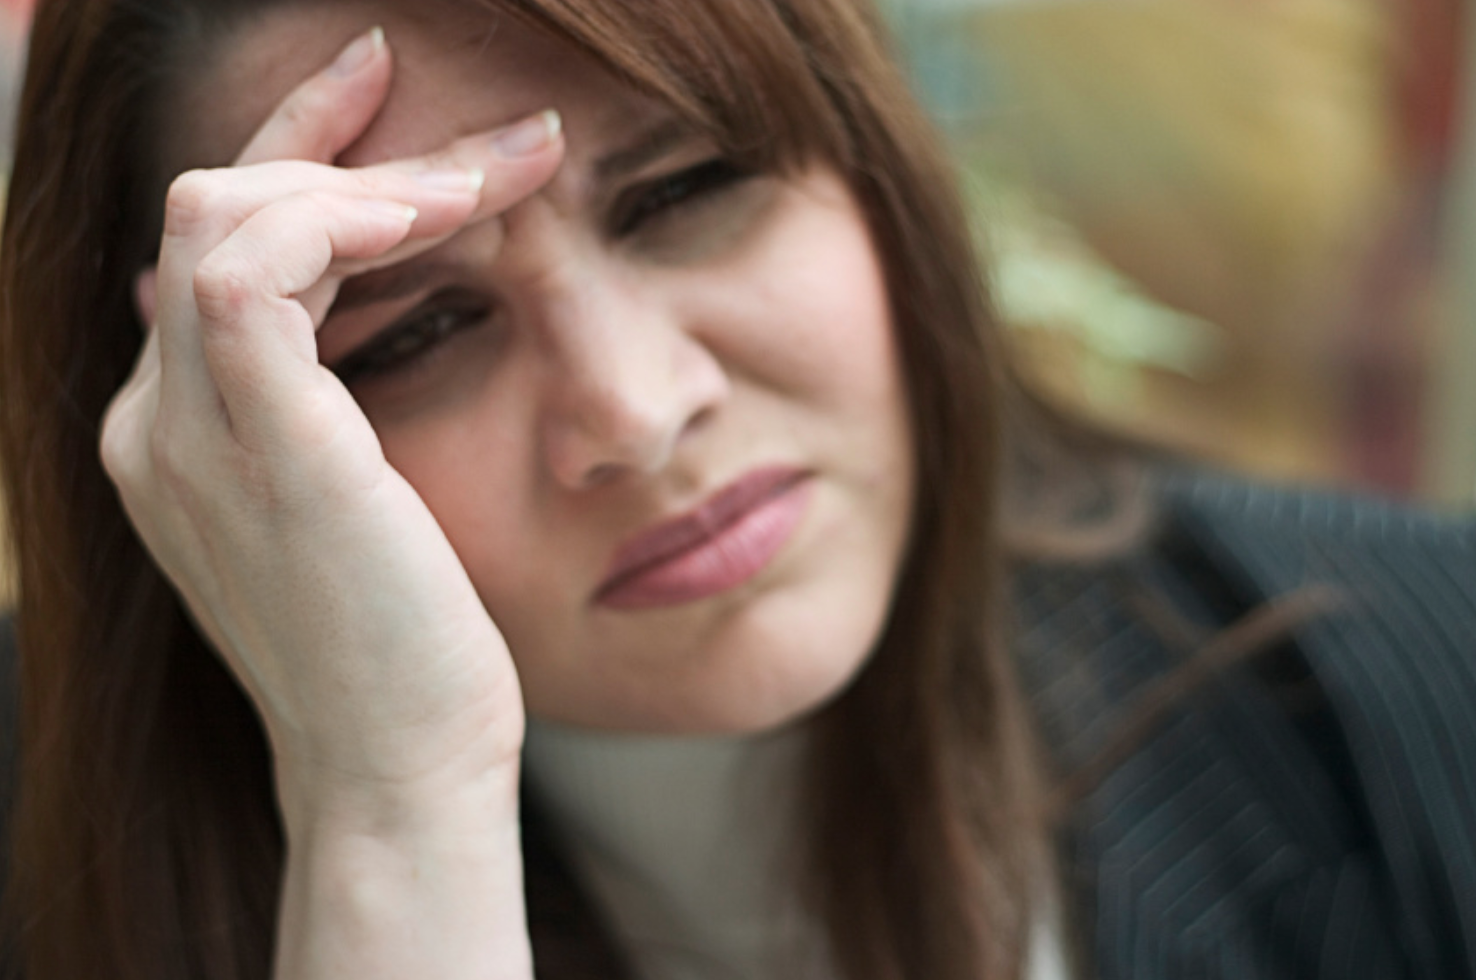 Zavegepant Meets Co-Primary Endpoints for Treatment of Acute Migraines in Adults